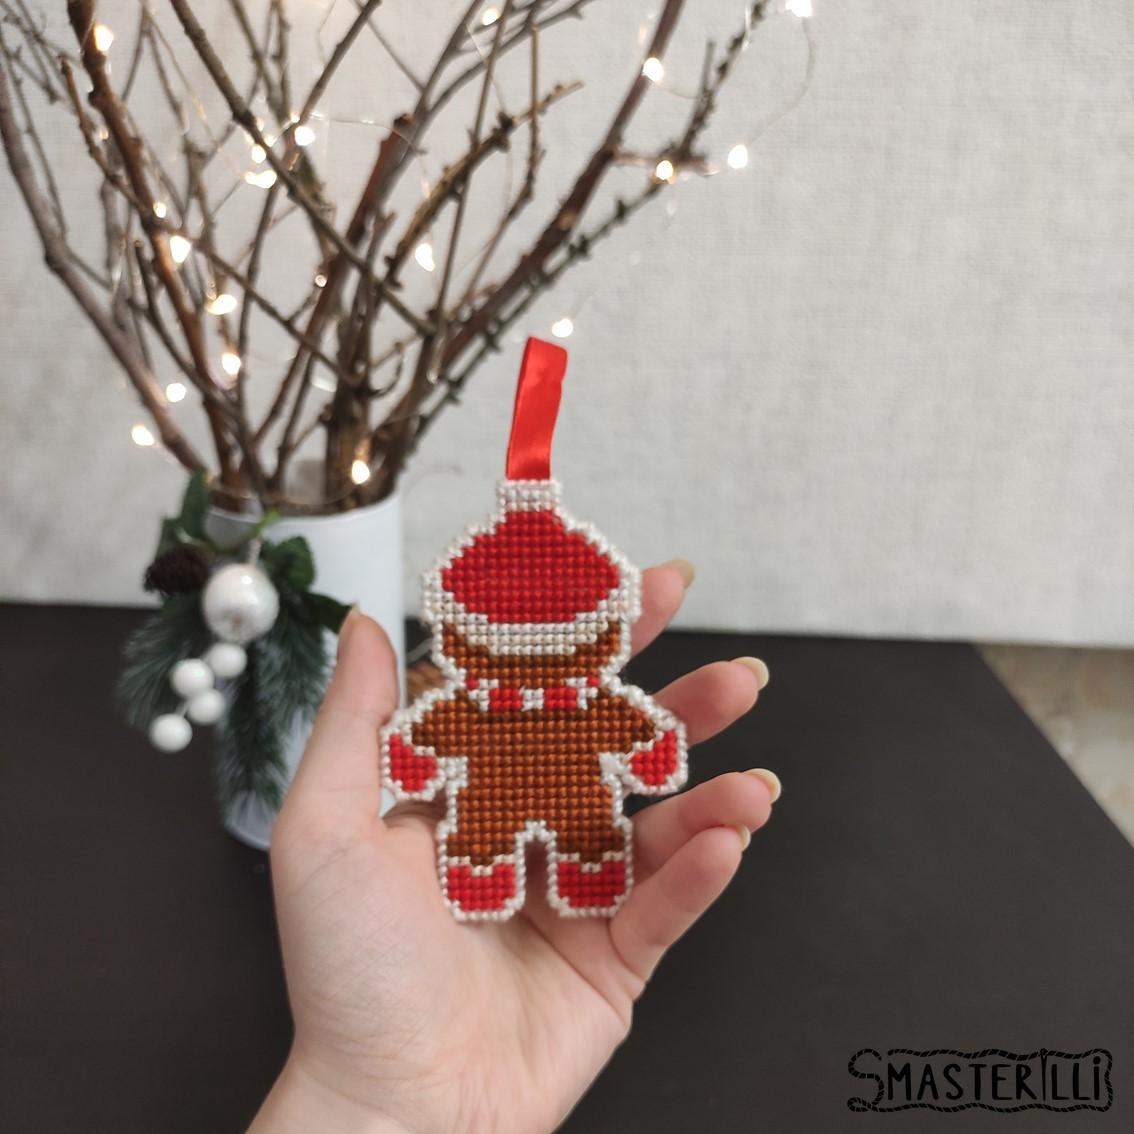 Gingerbread man cross stitch pattern for plastic canvas. Detailed tutorial with photos and instructions for creation christmas gift. Digital cross stitch pattern for instant download. Christmas handmade crafts. Plastic Canvas Project #smasterilli #crossstitch #crossstitchpattern #wintercrossstitch #christmascrossstitch #plasticcanvas #easycrossstitch #tinycrossstitch